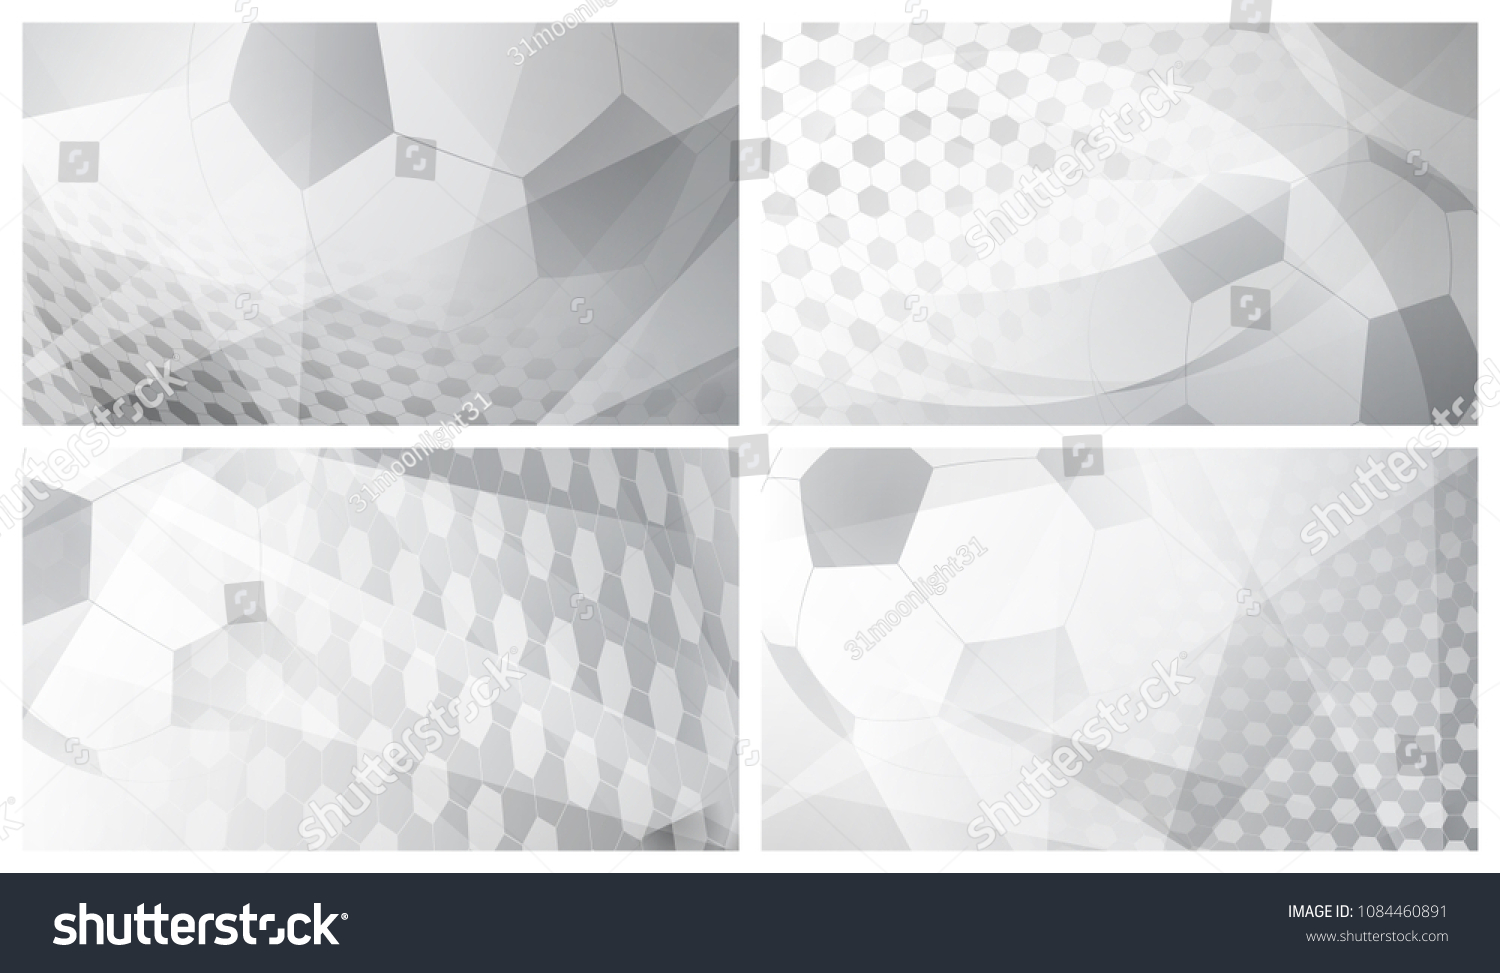 Set of four football or soccer abstract backgrounds with big ball in gray colors #1084460891